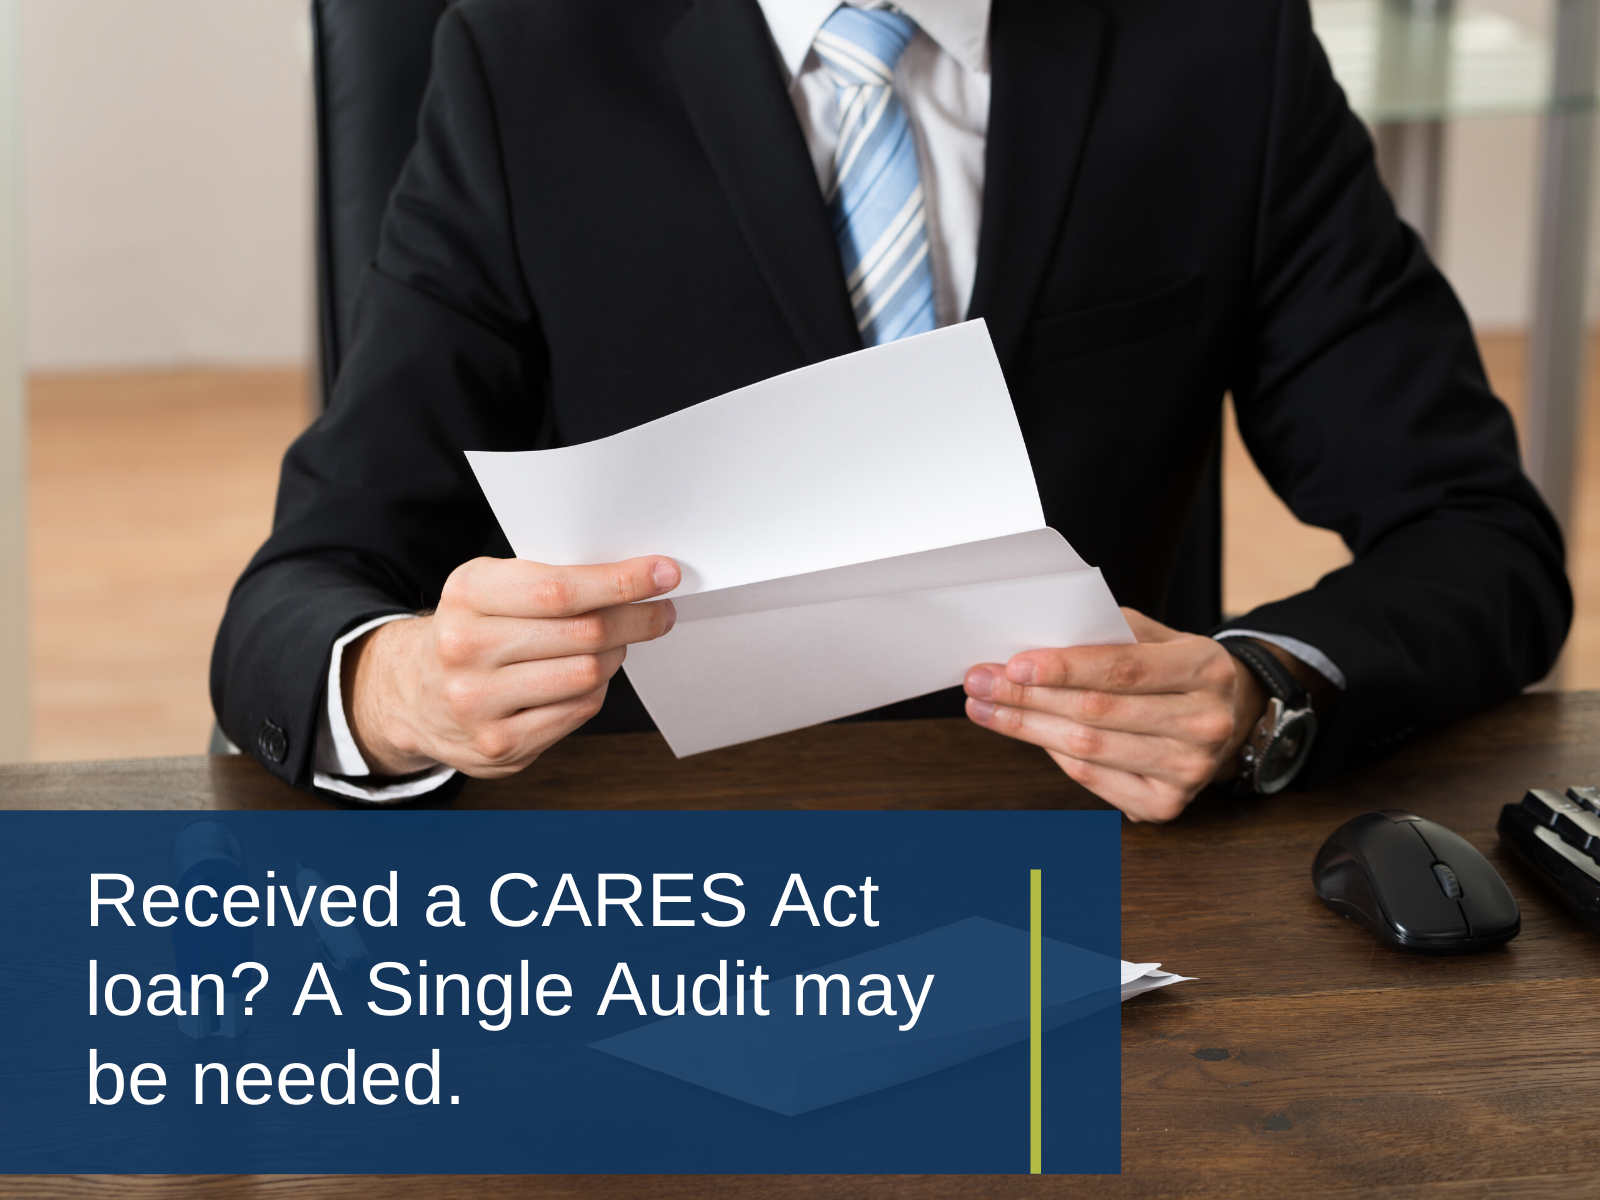 Received a Loan from the CARES Act? Does Your Nonprofit Need a Single Audit?